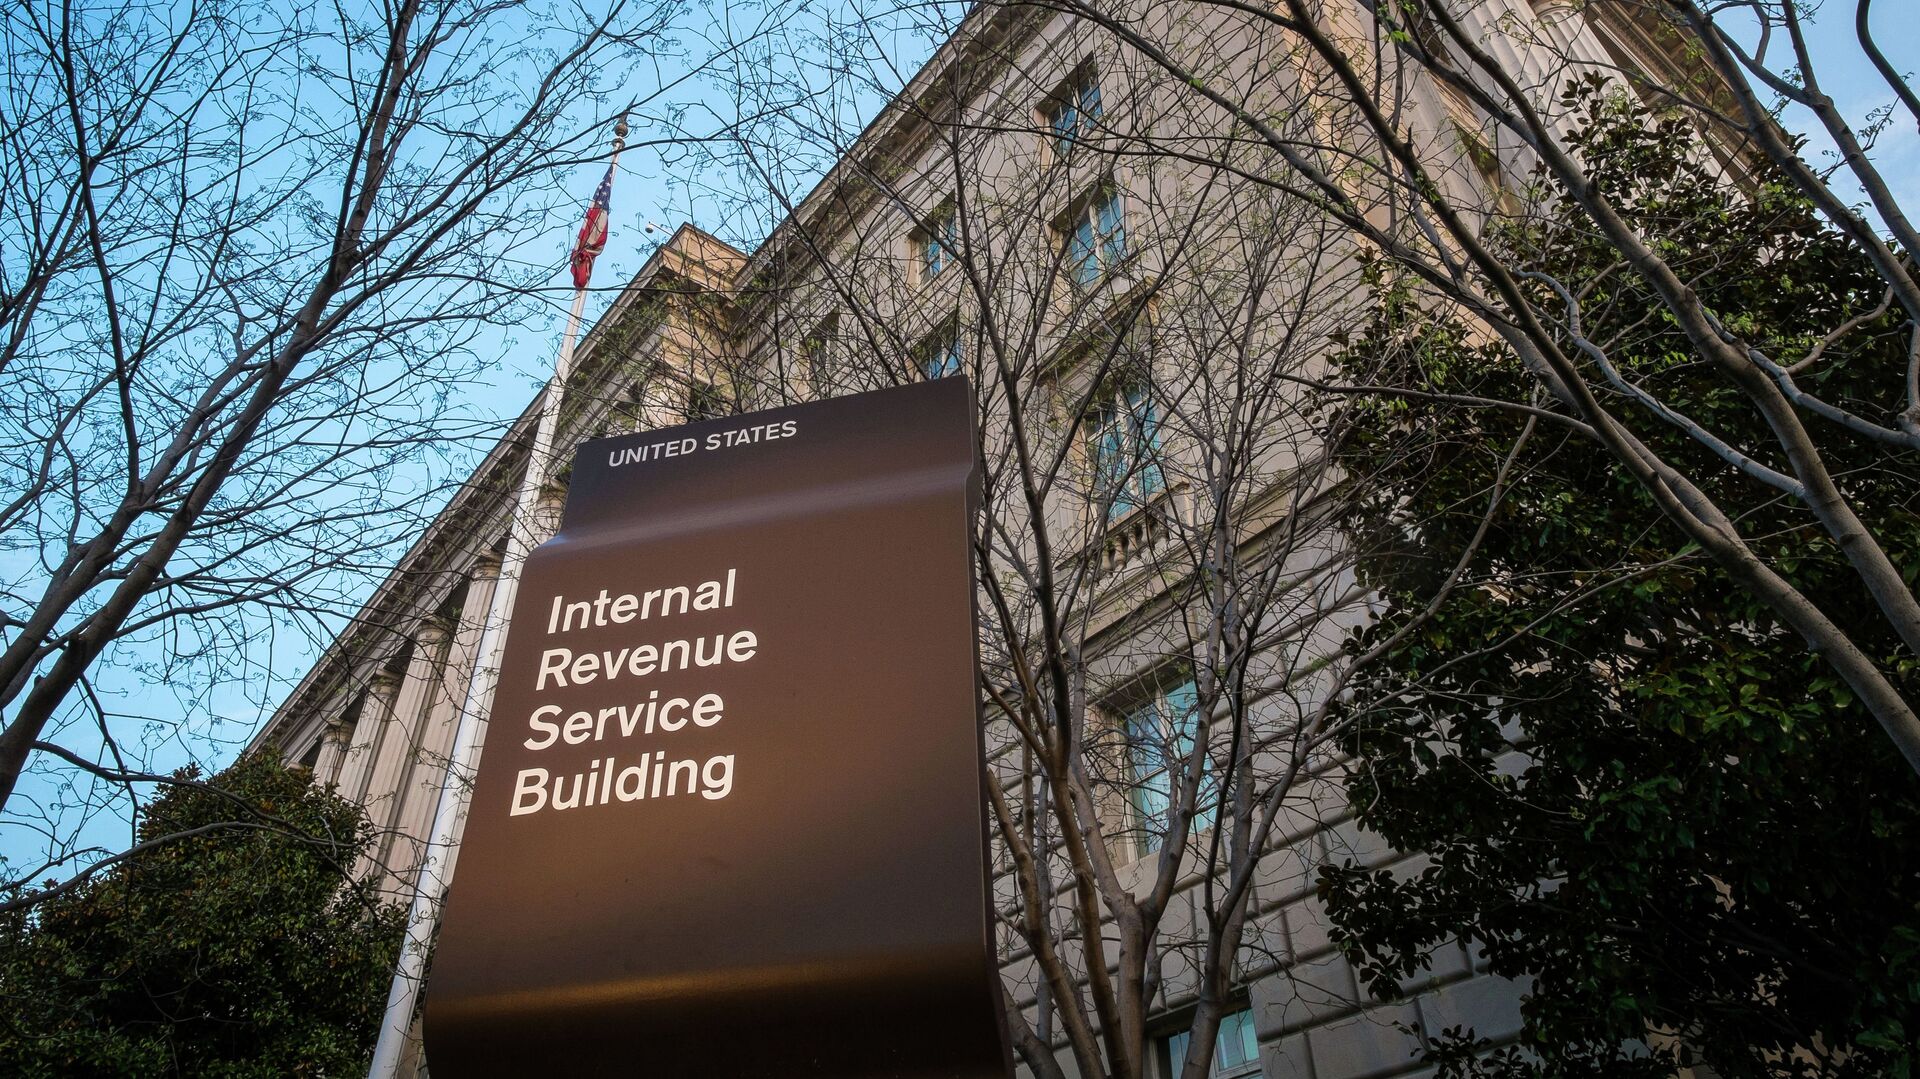 In this April 13, 2014 file photo, the Internal Revenue Service Headquarters (IRS) building is seen in Washington. The IRS is cutting taxpayer services to historically low levels just as President Barack Obama's health law will make filing a federal tax return more complicated for millions of families.  - Sputnik International, 1920, 29.01.2022